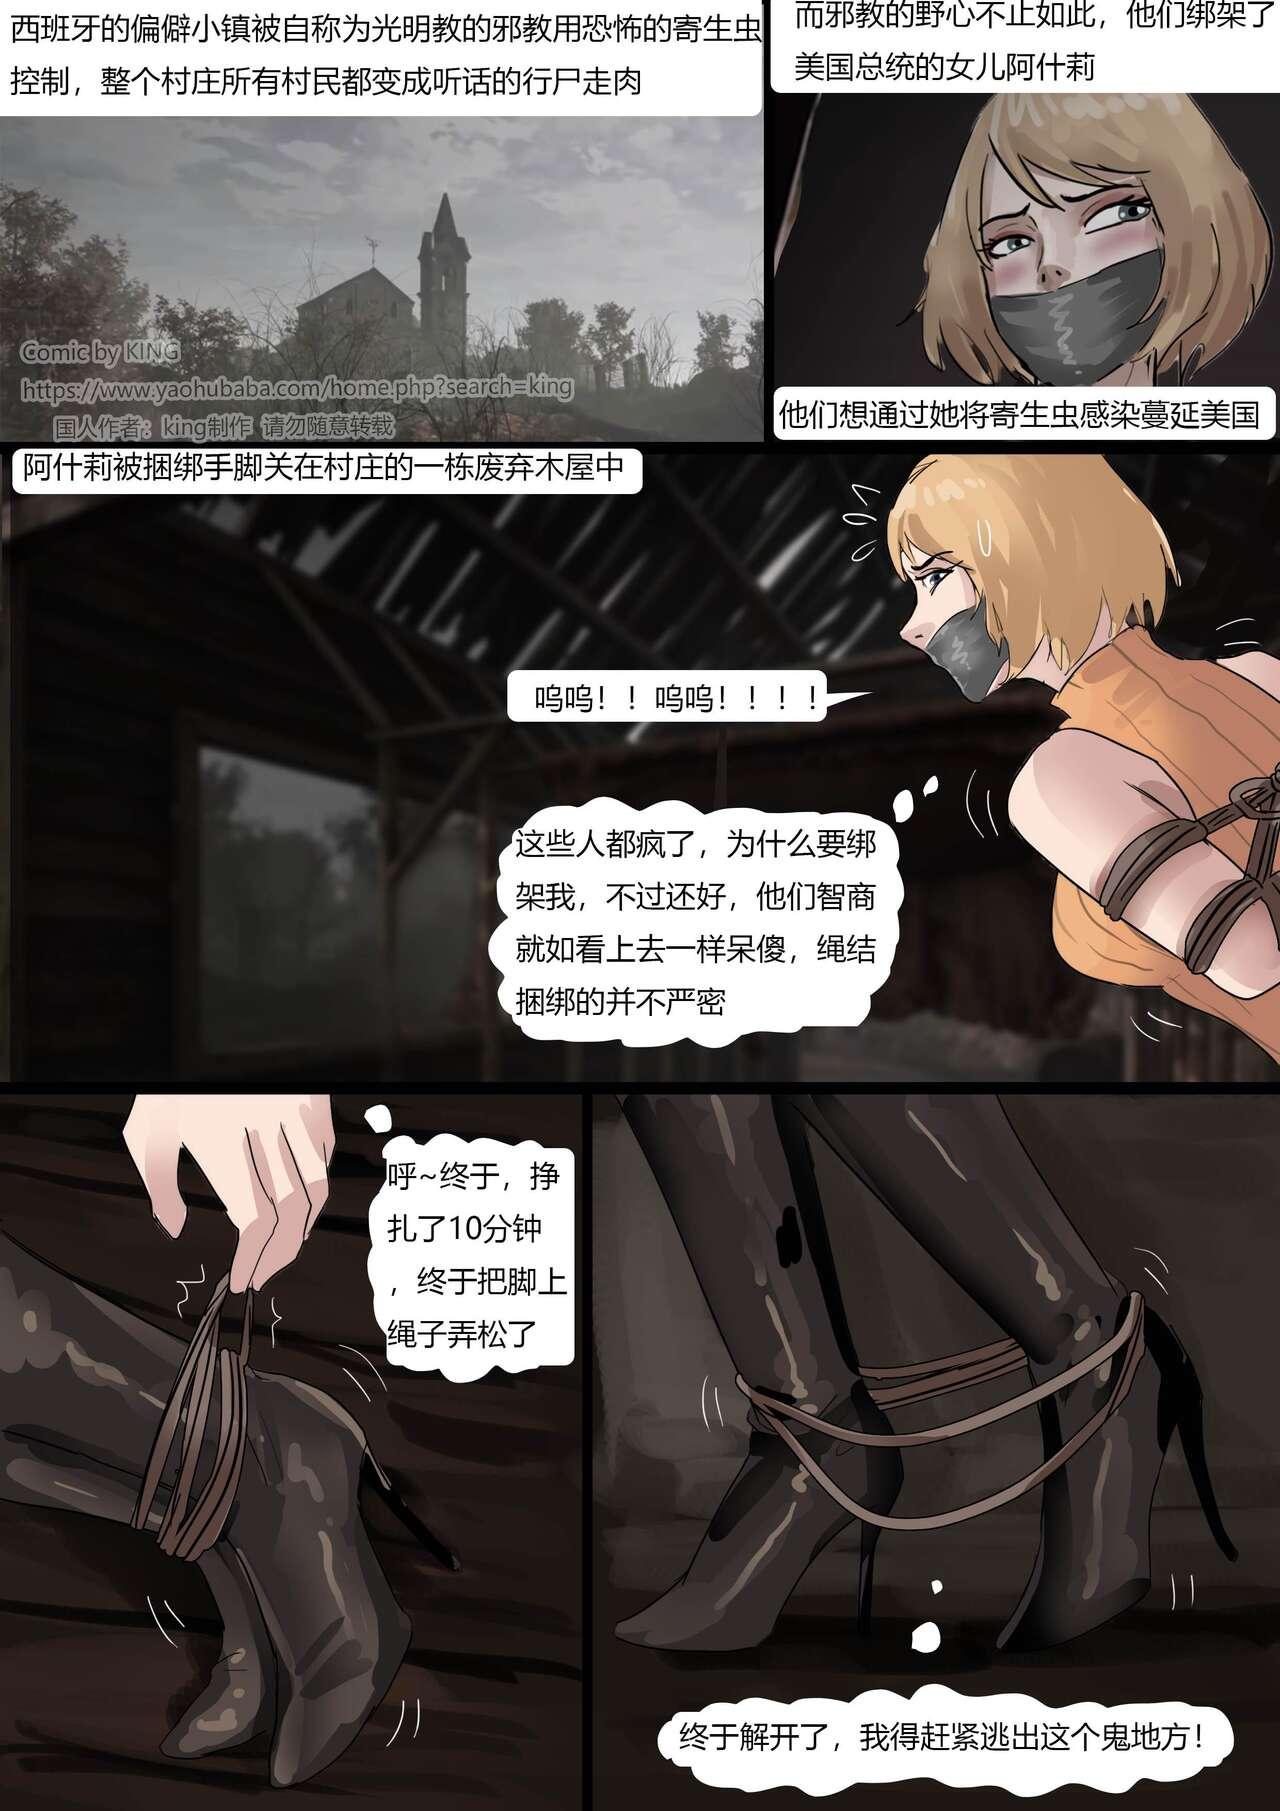 Thylinh [King] Resident Evil 4 Remastered -- Two Beauties In Distress - Resident evil | biohazard Gay Longhair - Picture 2